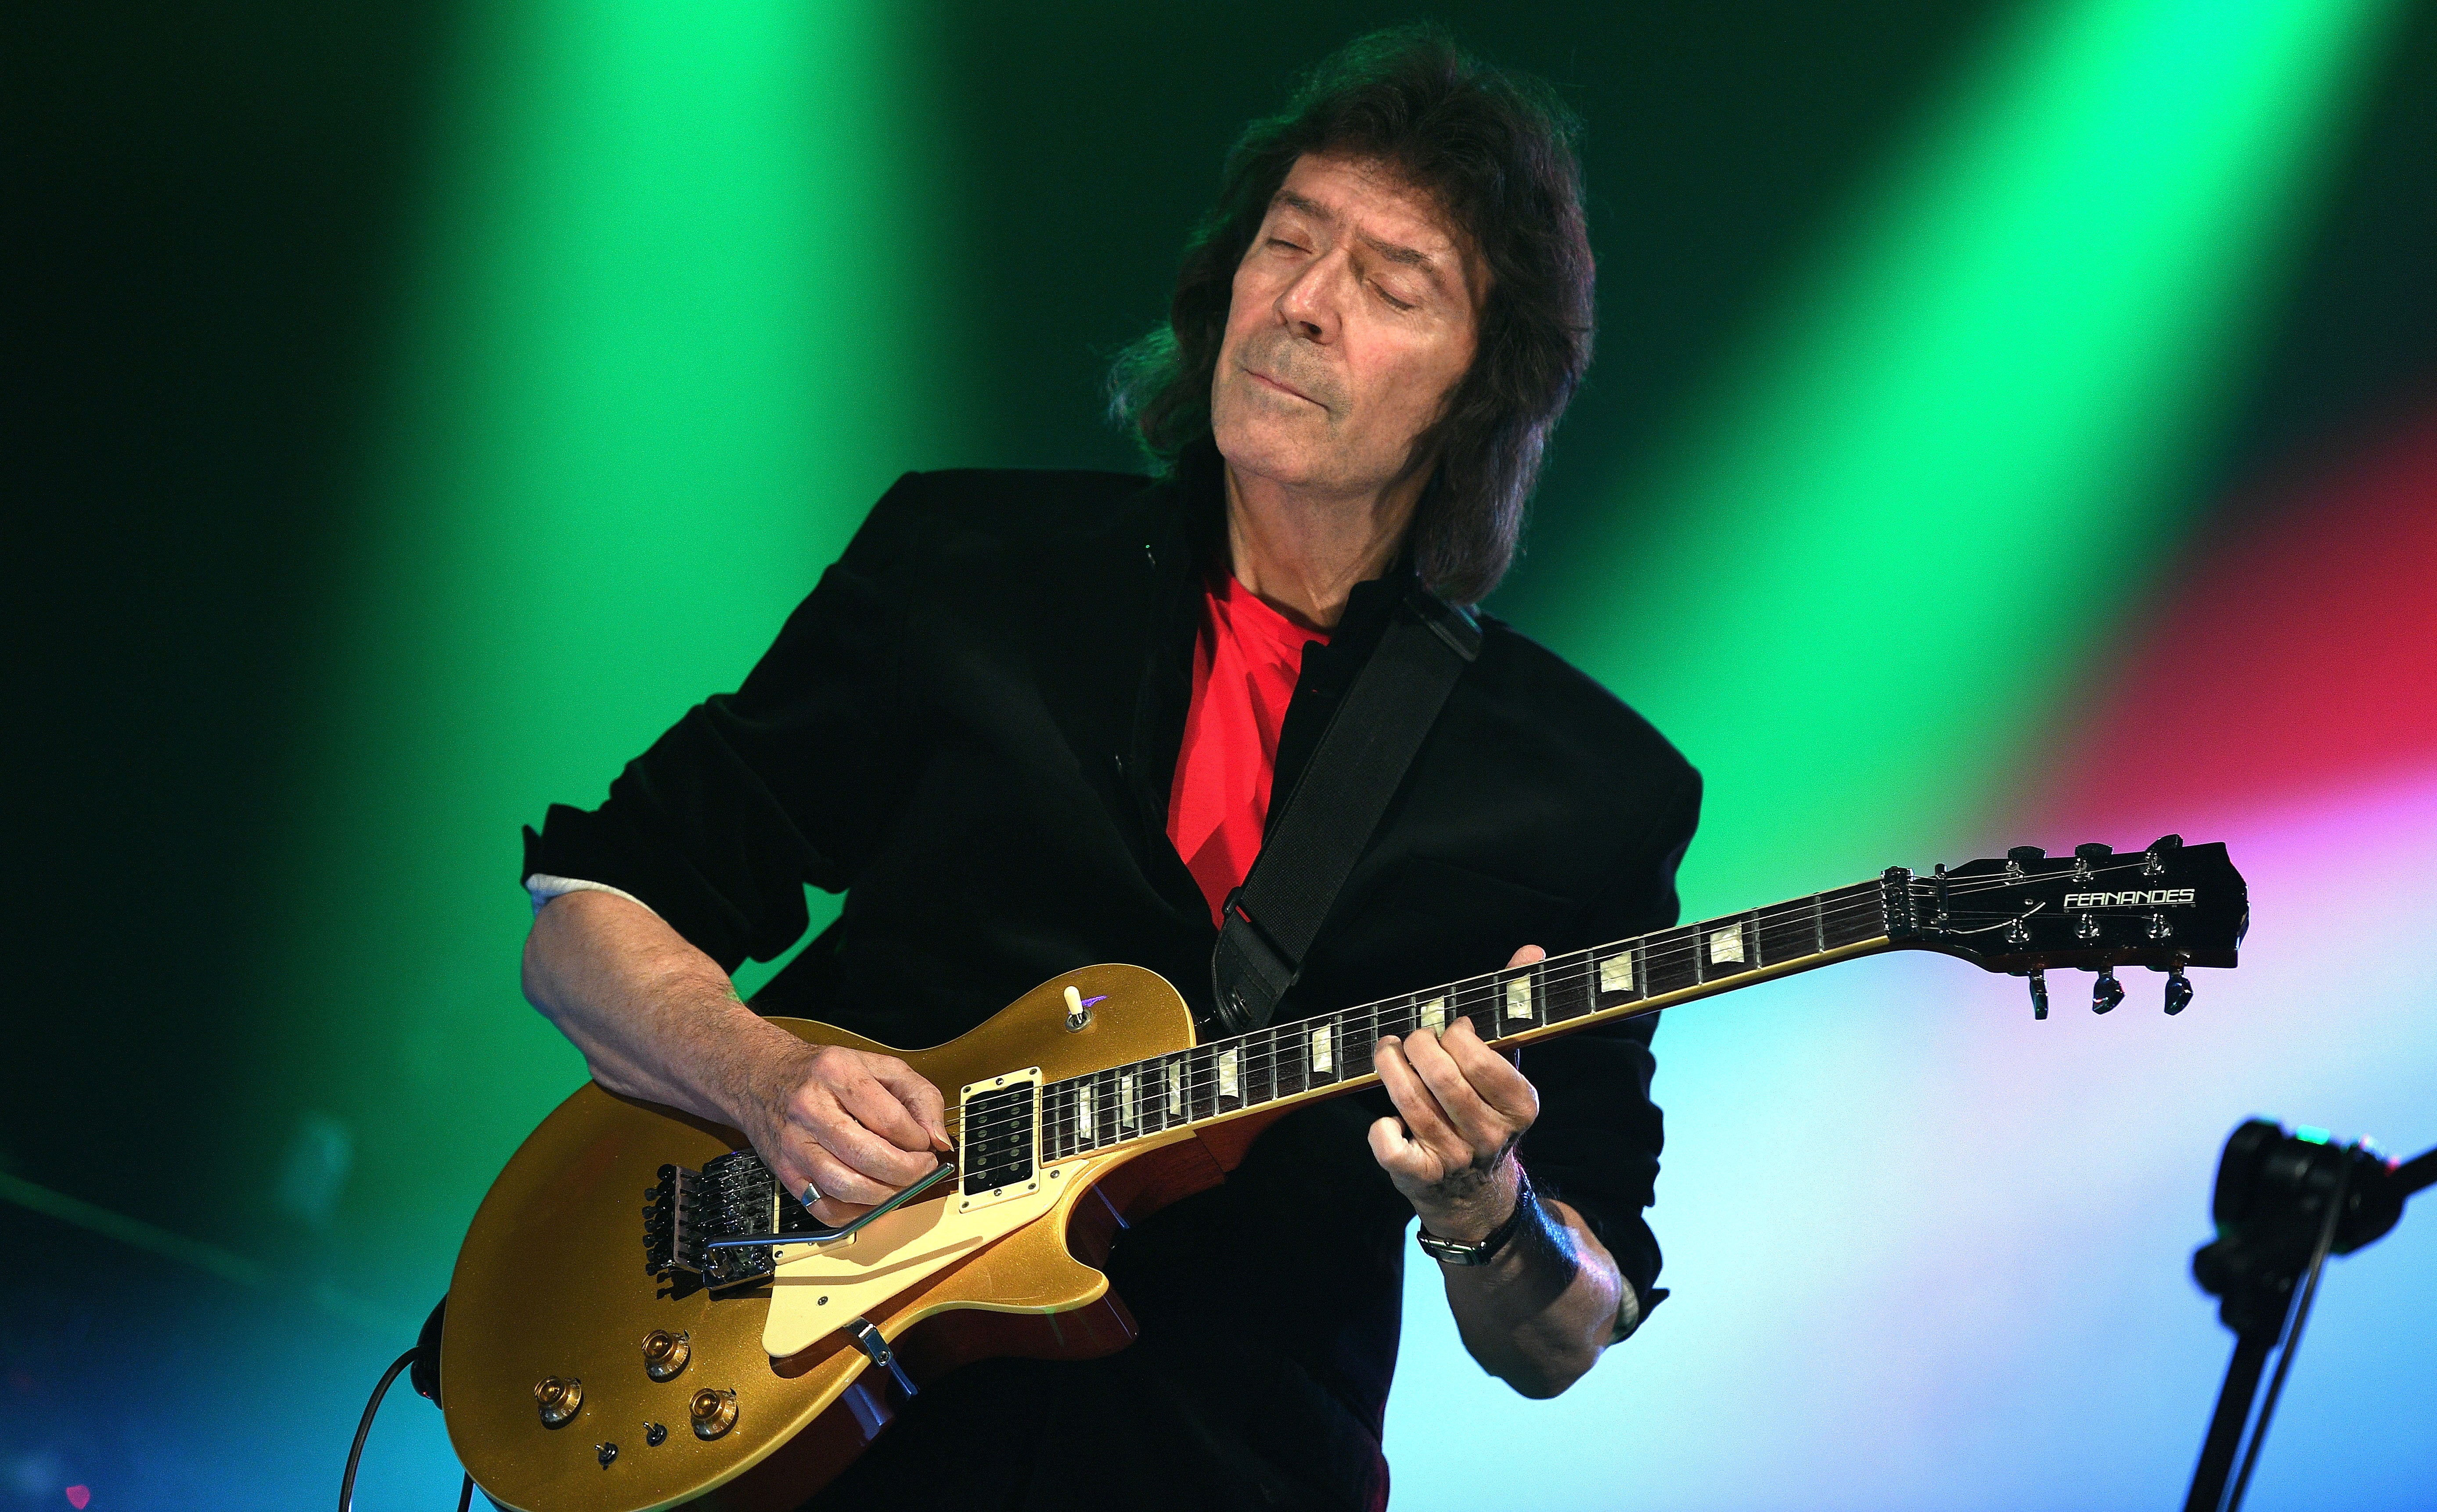 An Evening with Steve Hackett: Genesis Revisited, Foxtrot at 50 & More free presale listing for show tickets in Des Moines, IA (Hoyt Sherman Place)